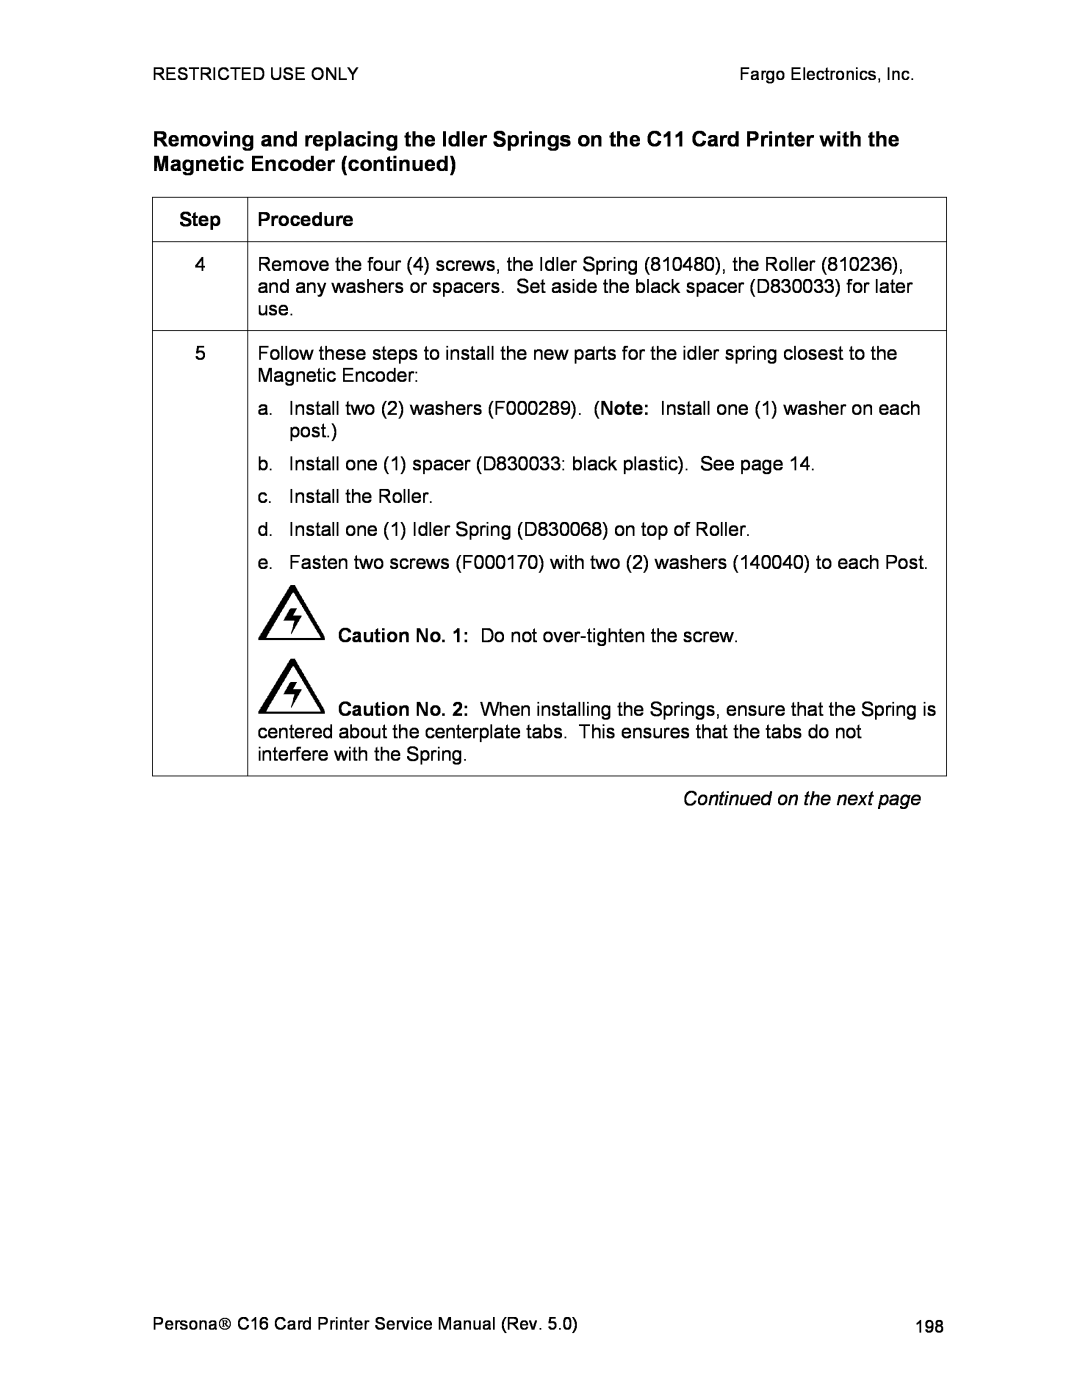 FARGO electronic C16 service manual Step, Procedure, Continued on the next page 